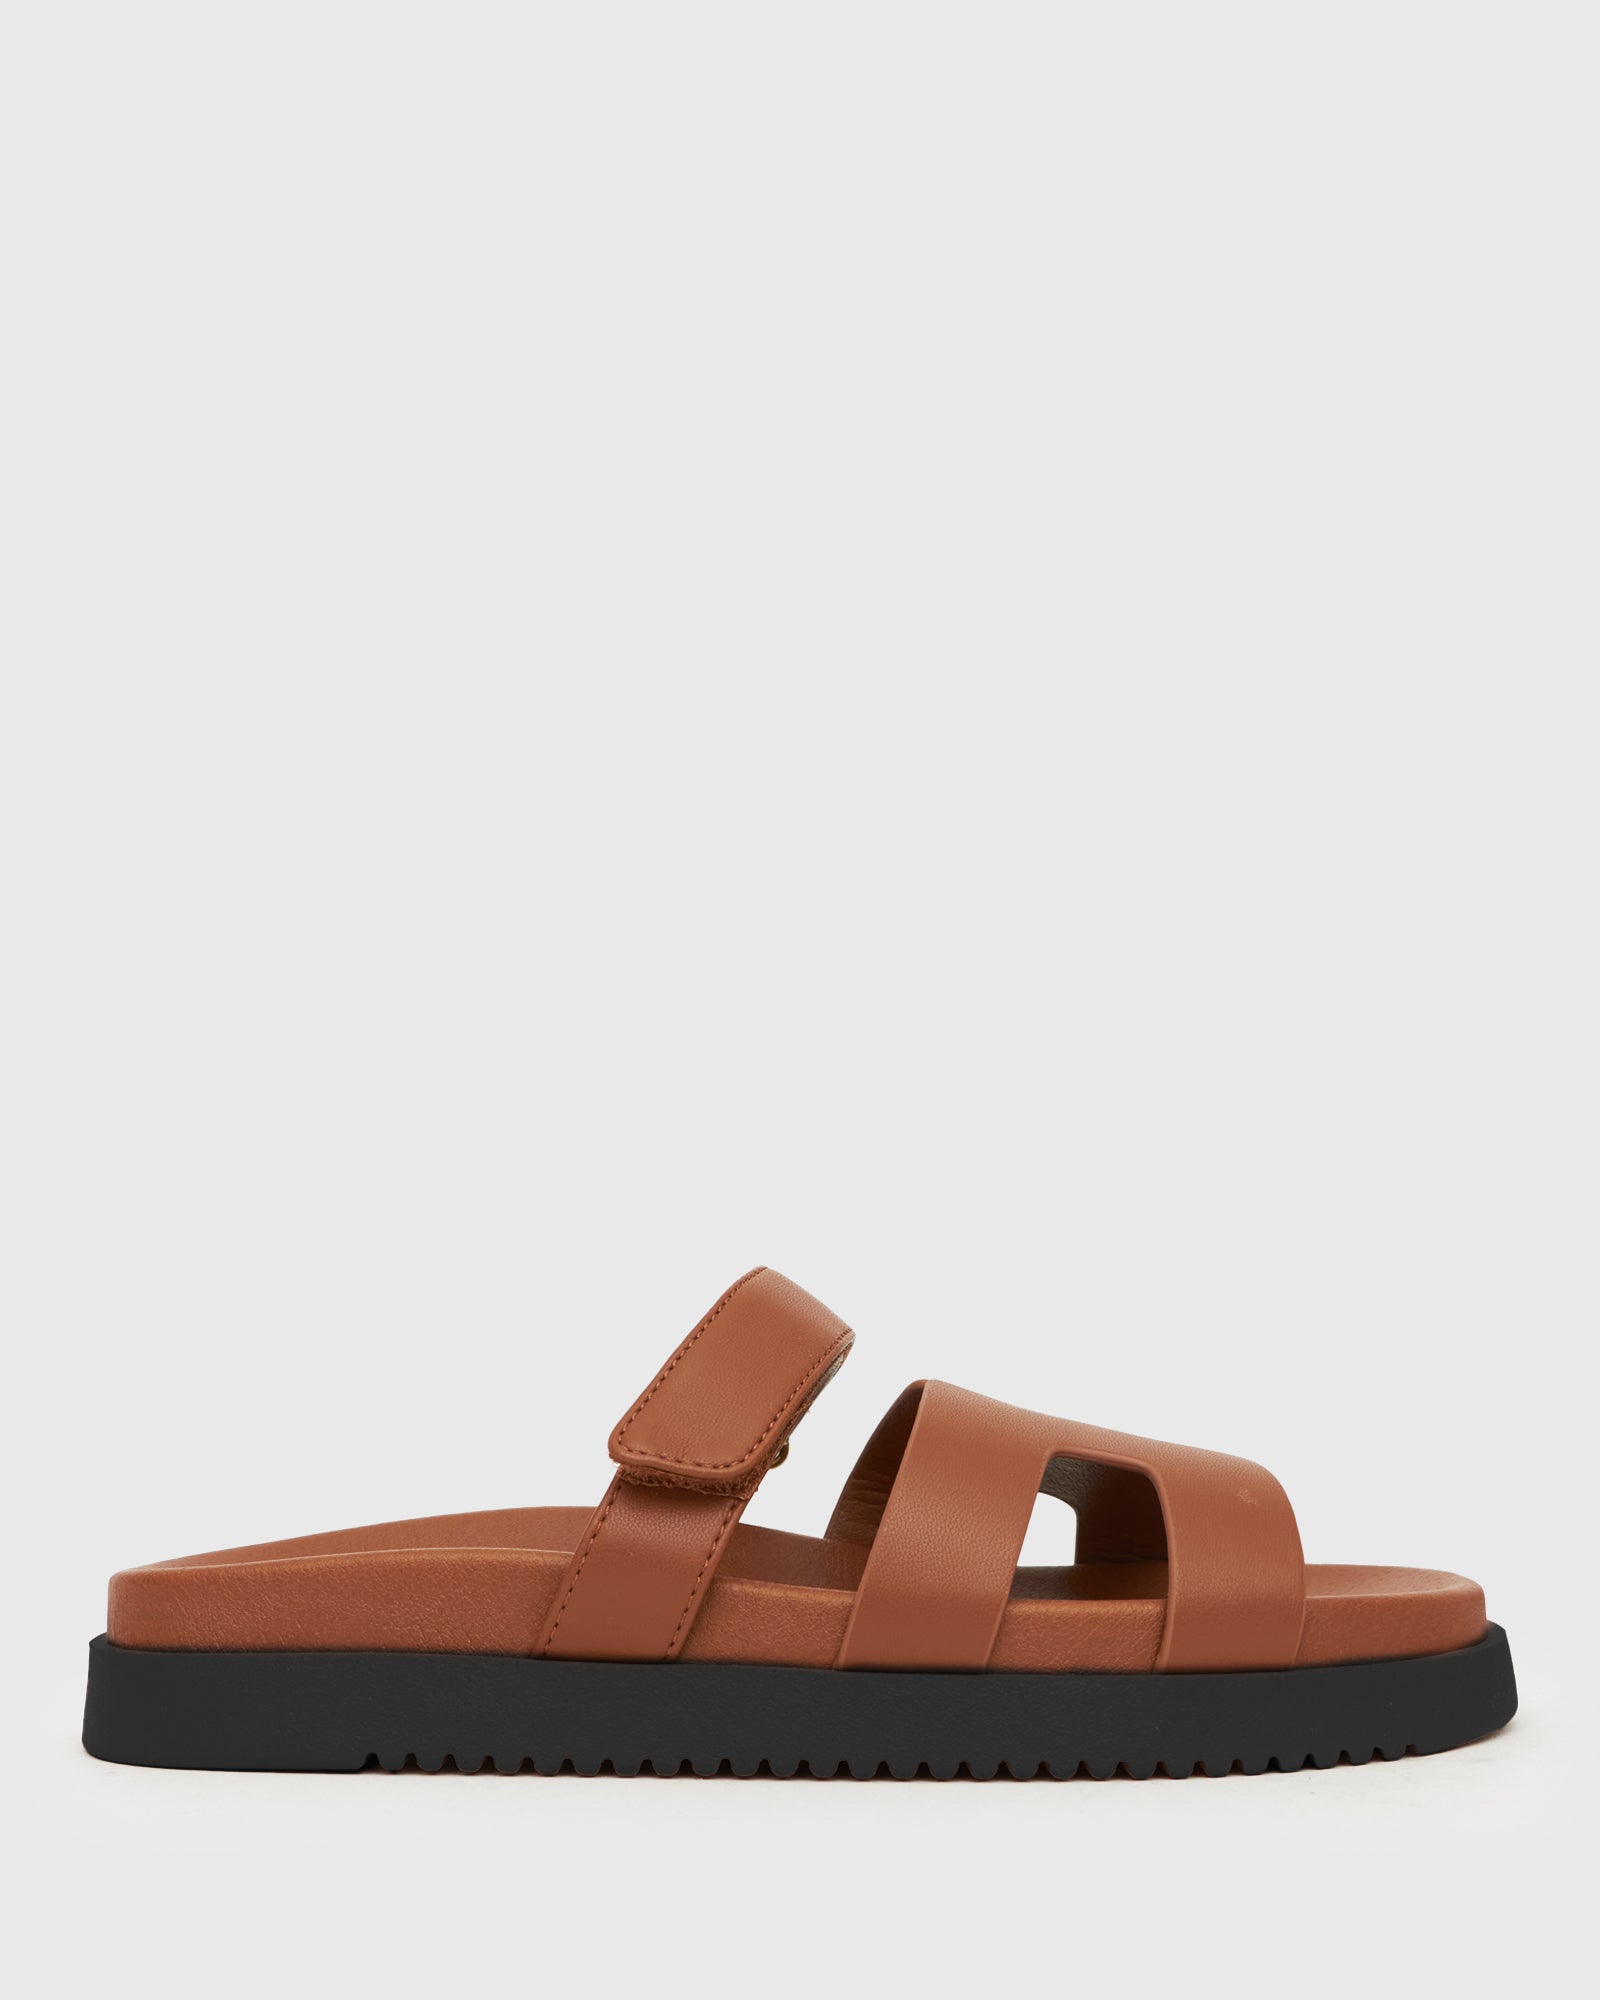 Buy MARBELLA Footbed Sandals by Betts online - Betts